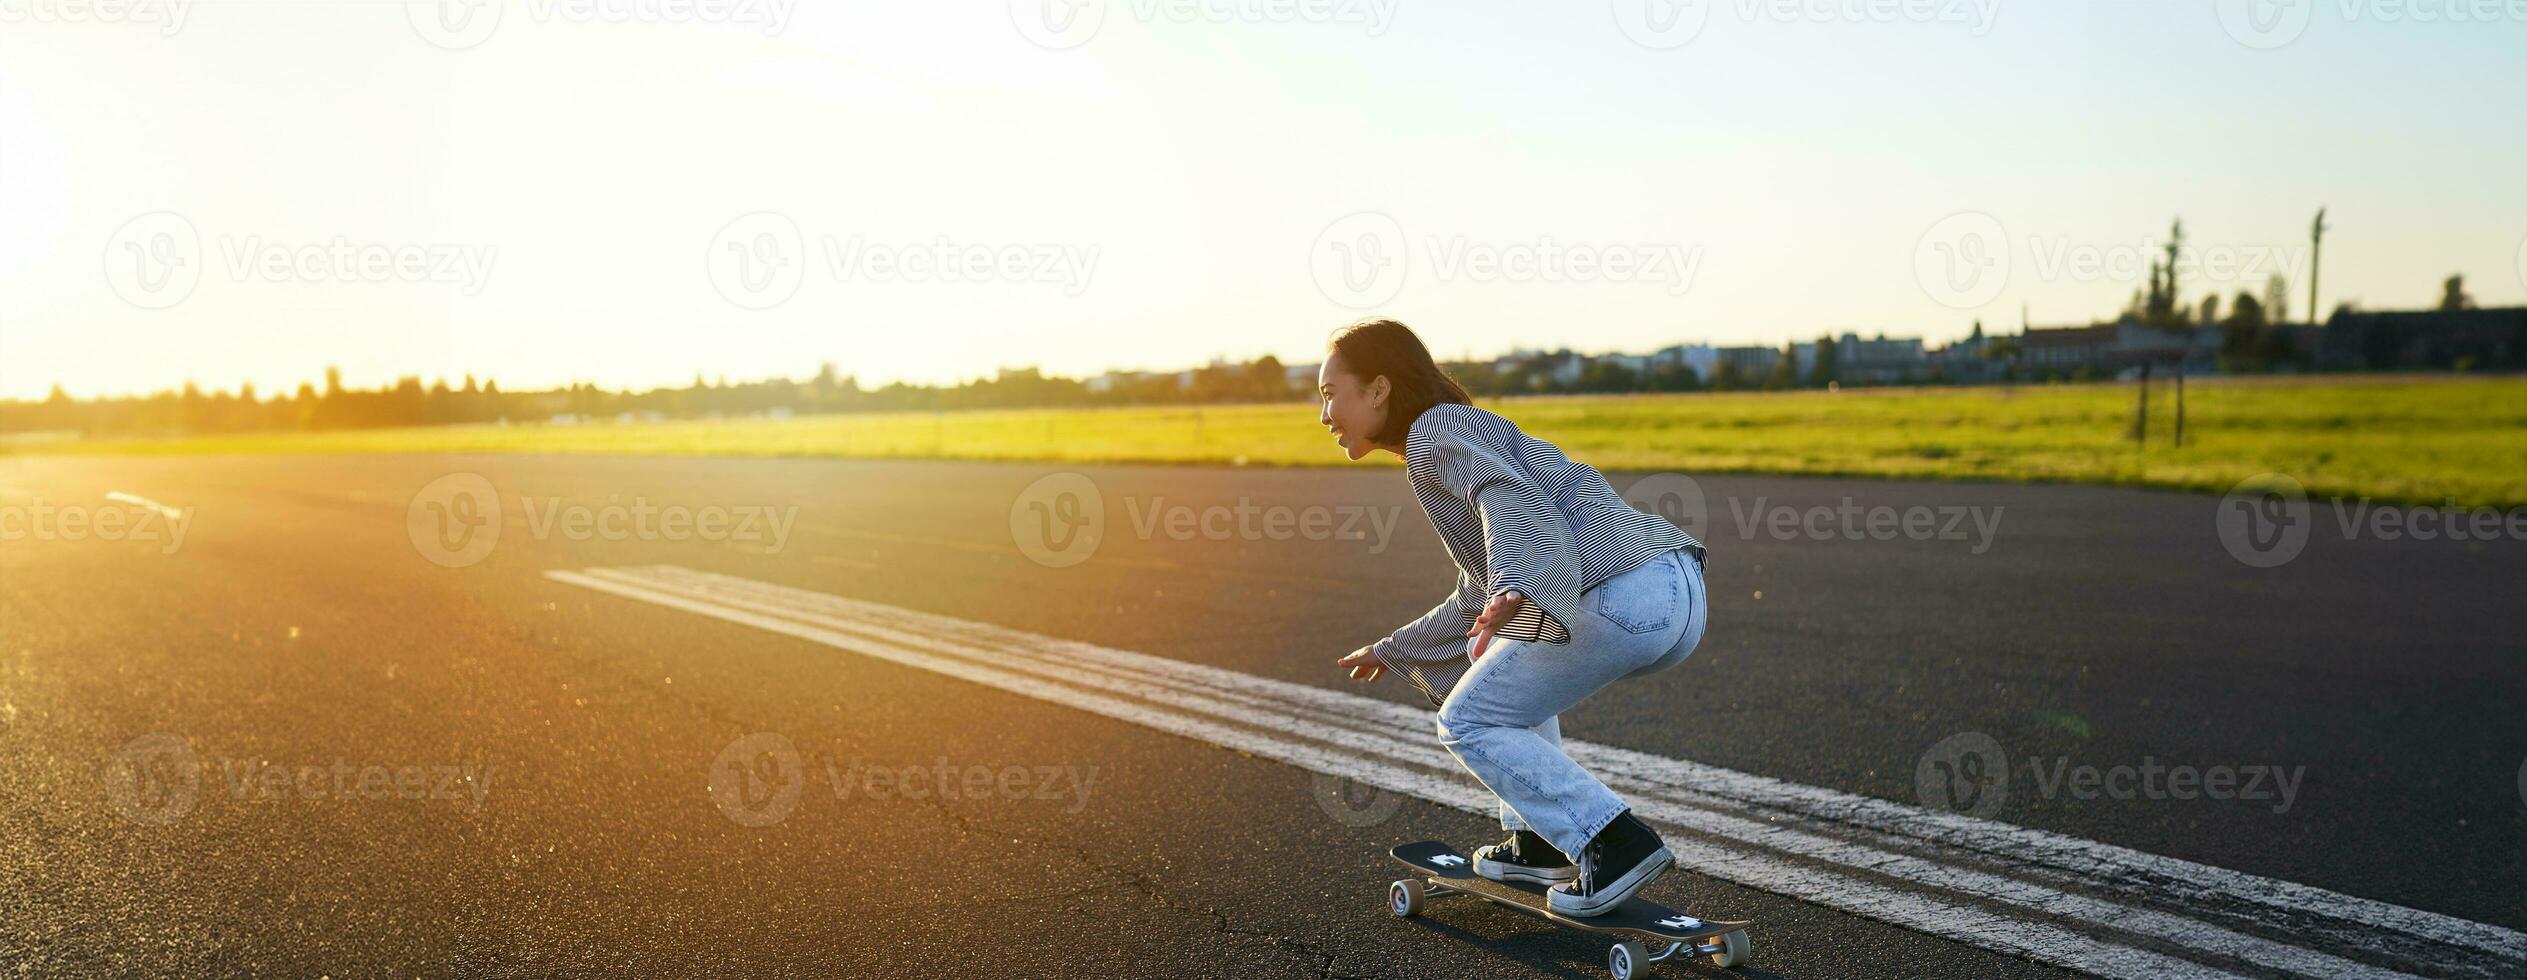 Side view of beautiful asian girl on skateboard, riding her cruiser towards the sun on an empty road. Happy young skater enjoying sunny day on her skate photo